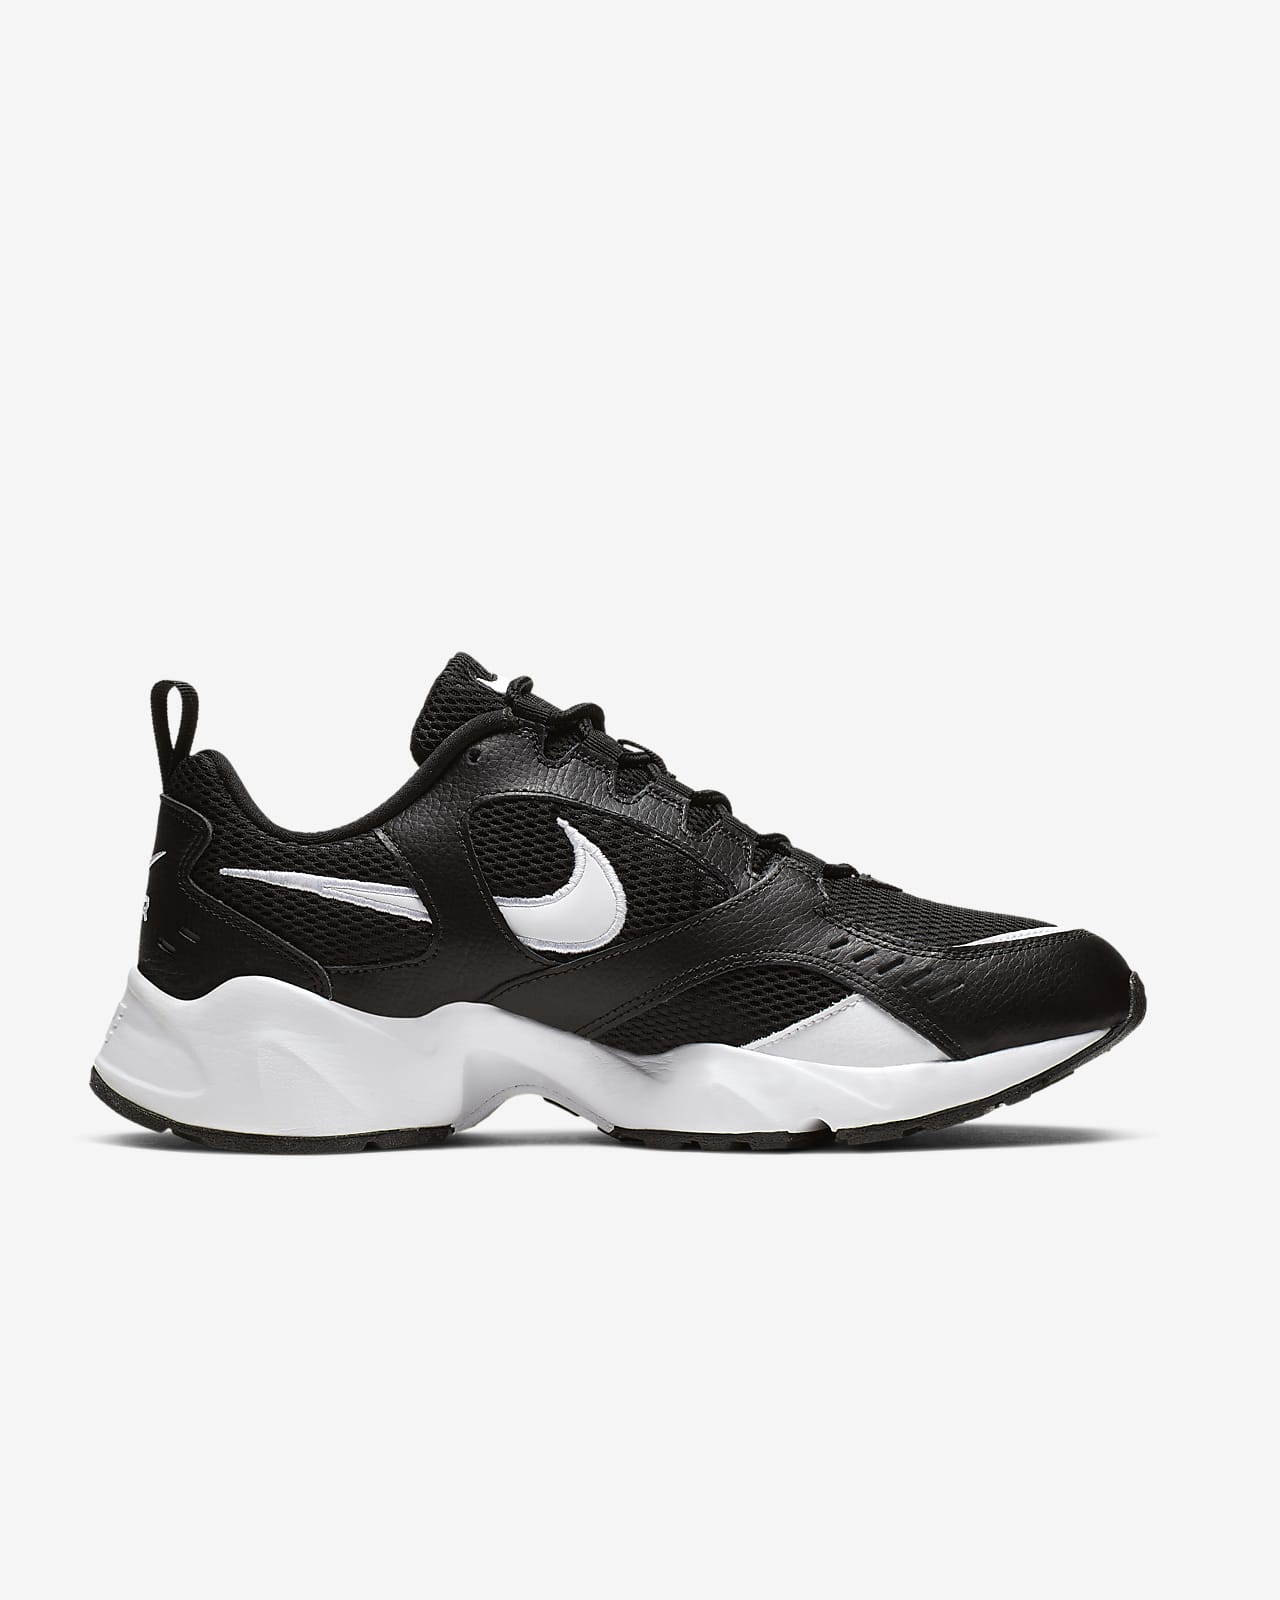 nike air heights white and black